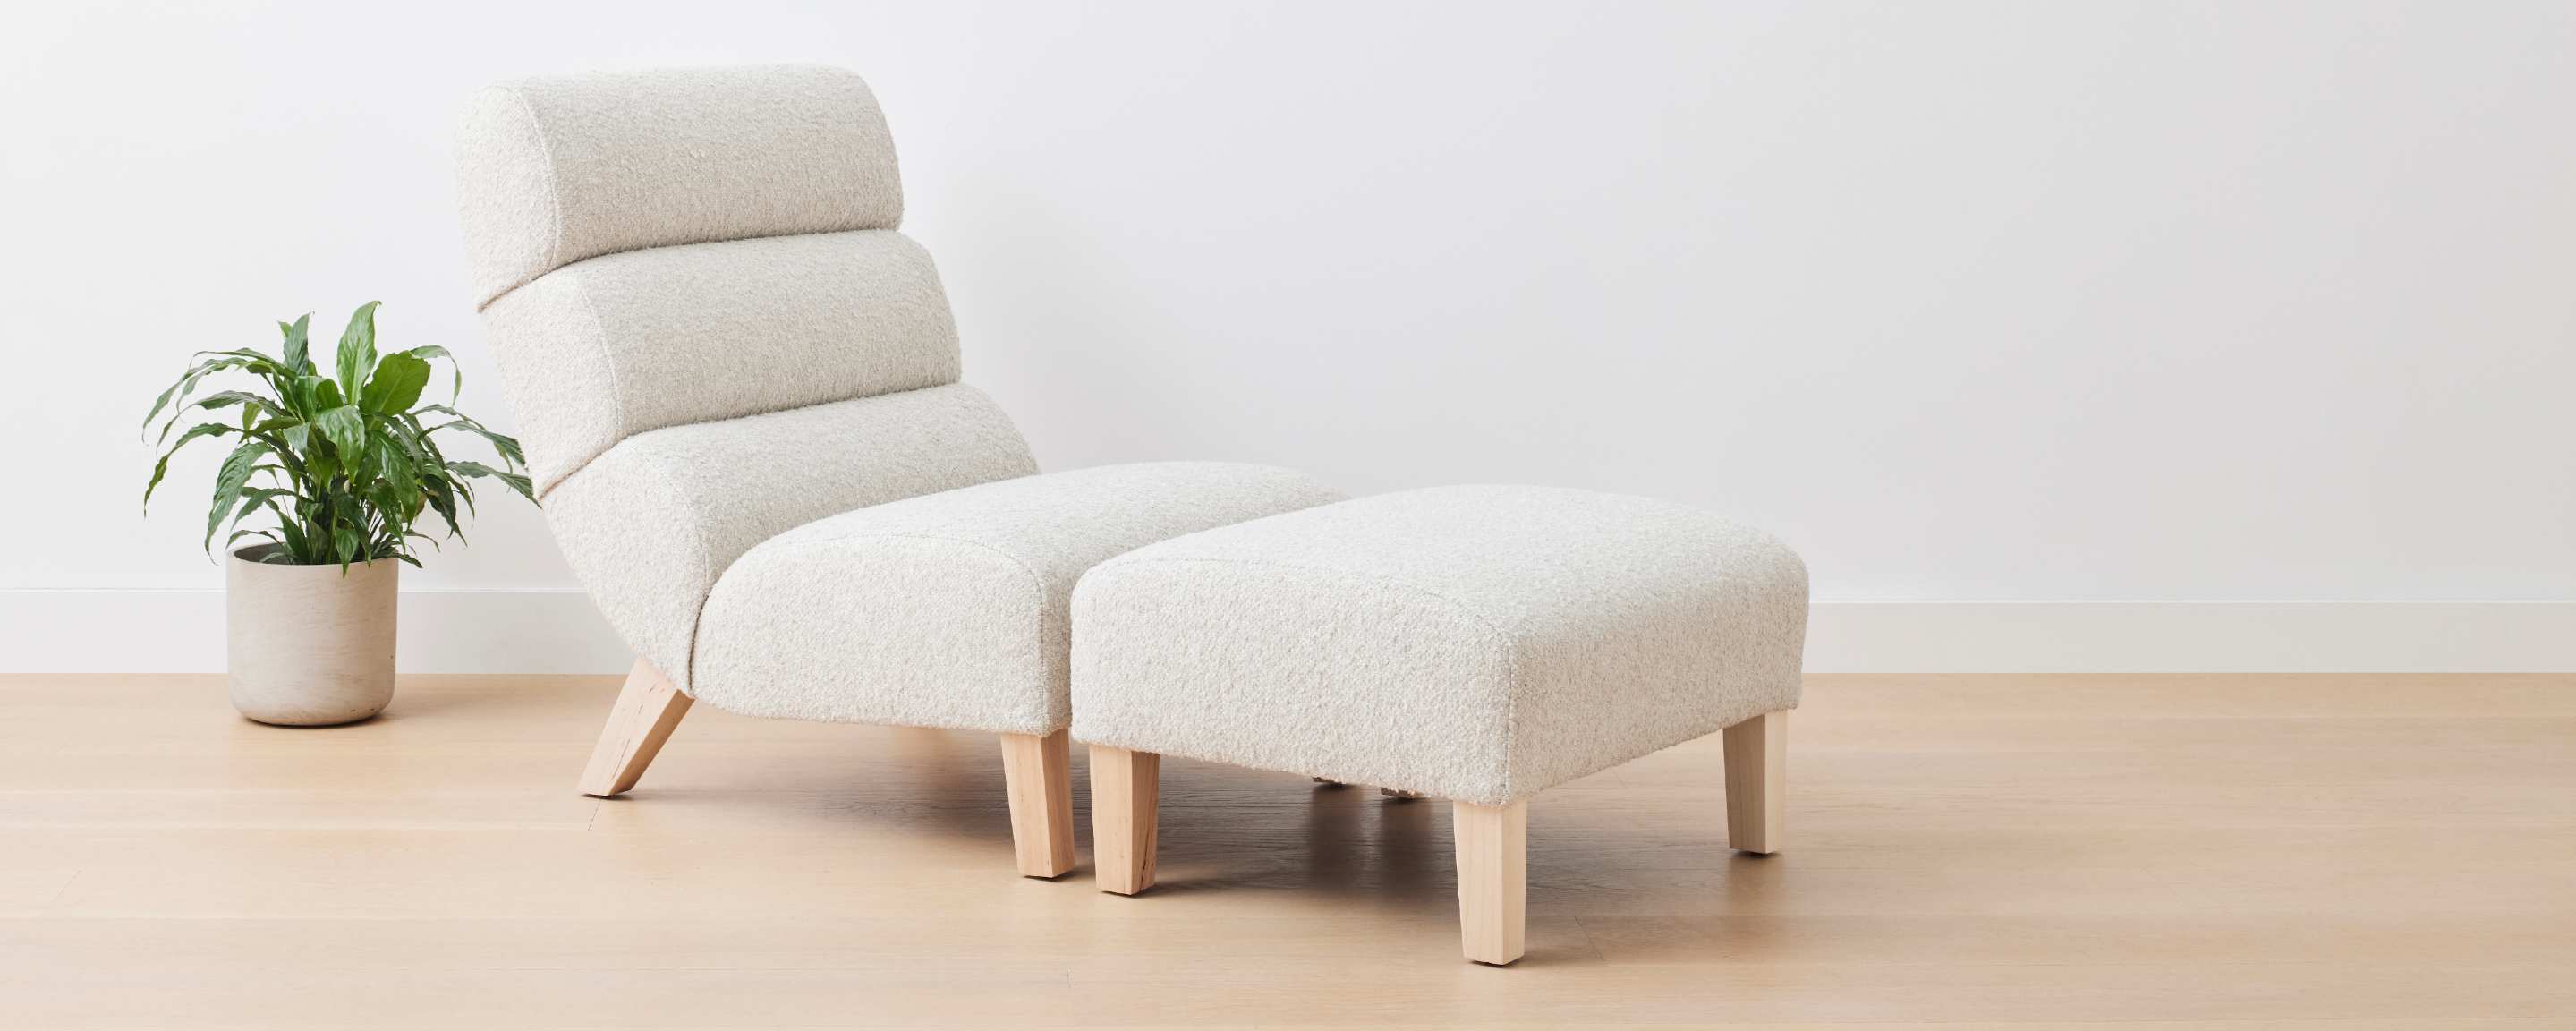 the homenature channel chair